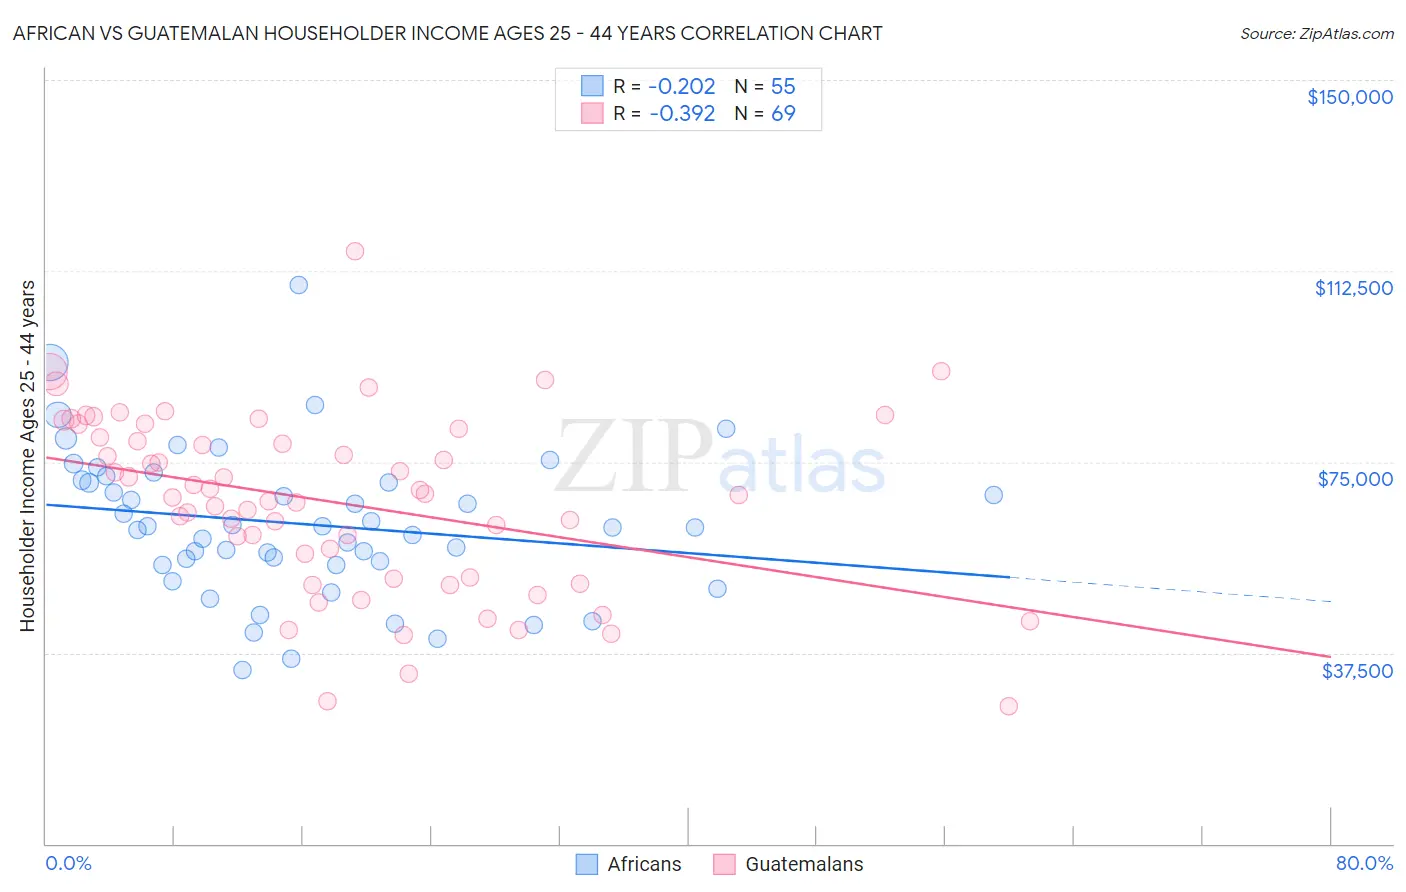 African vs Guatemalan Householder Income Ages 25 - 44 years